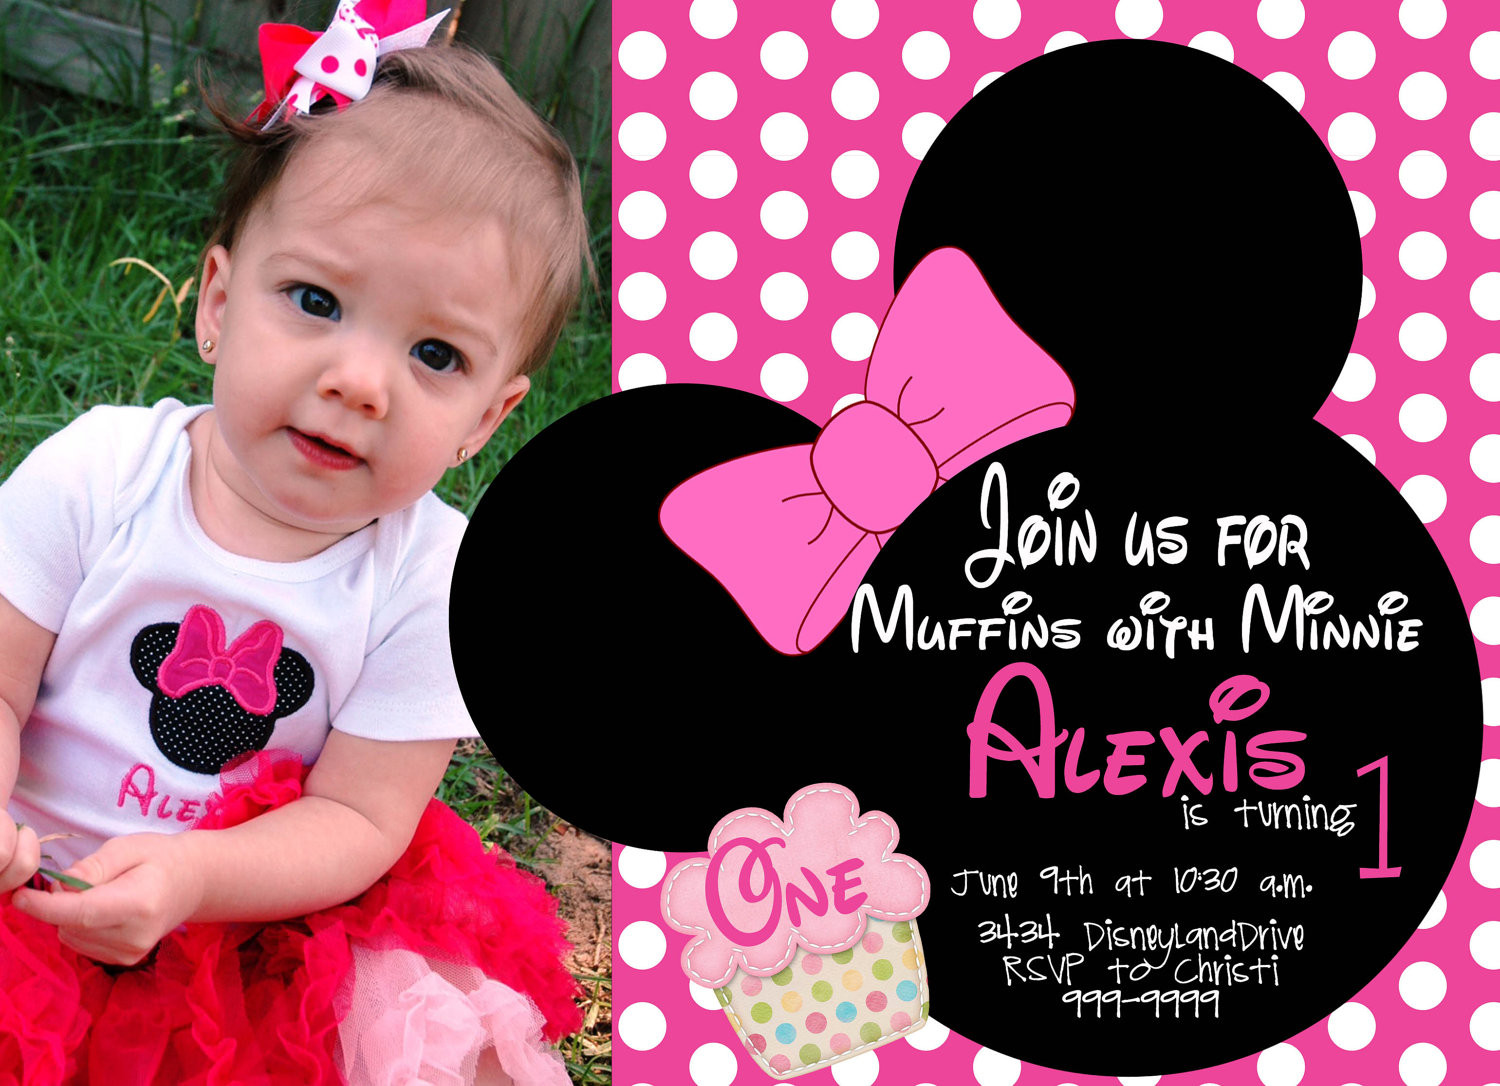 Minnie Mouse 1st Birthday Personalized Invitations
 Minnie Mouse First Birthday Invitations FREE Invitation